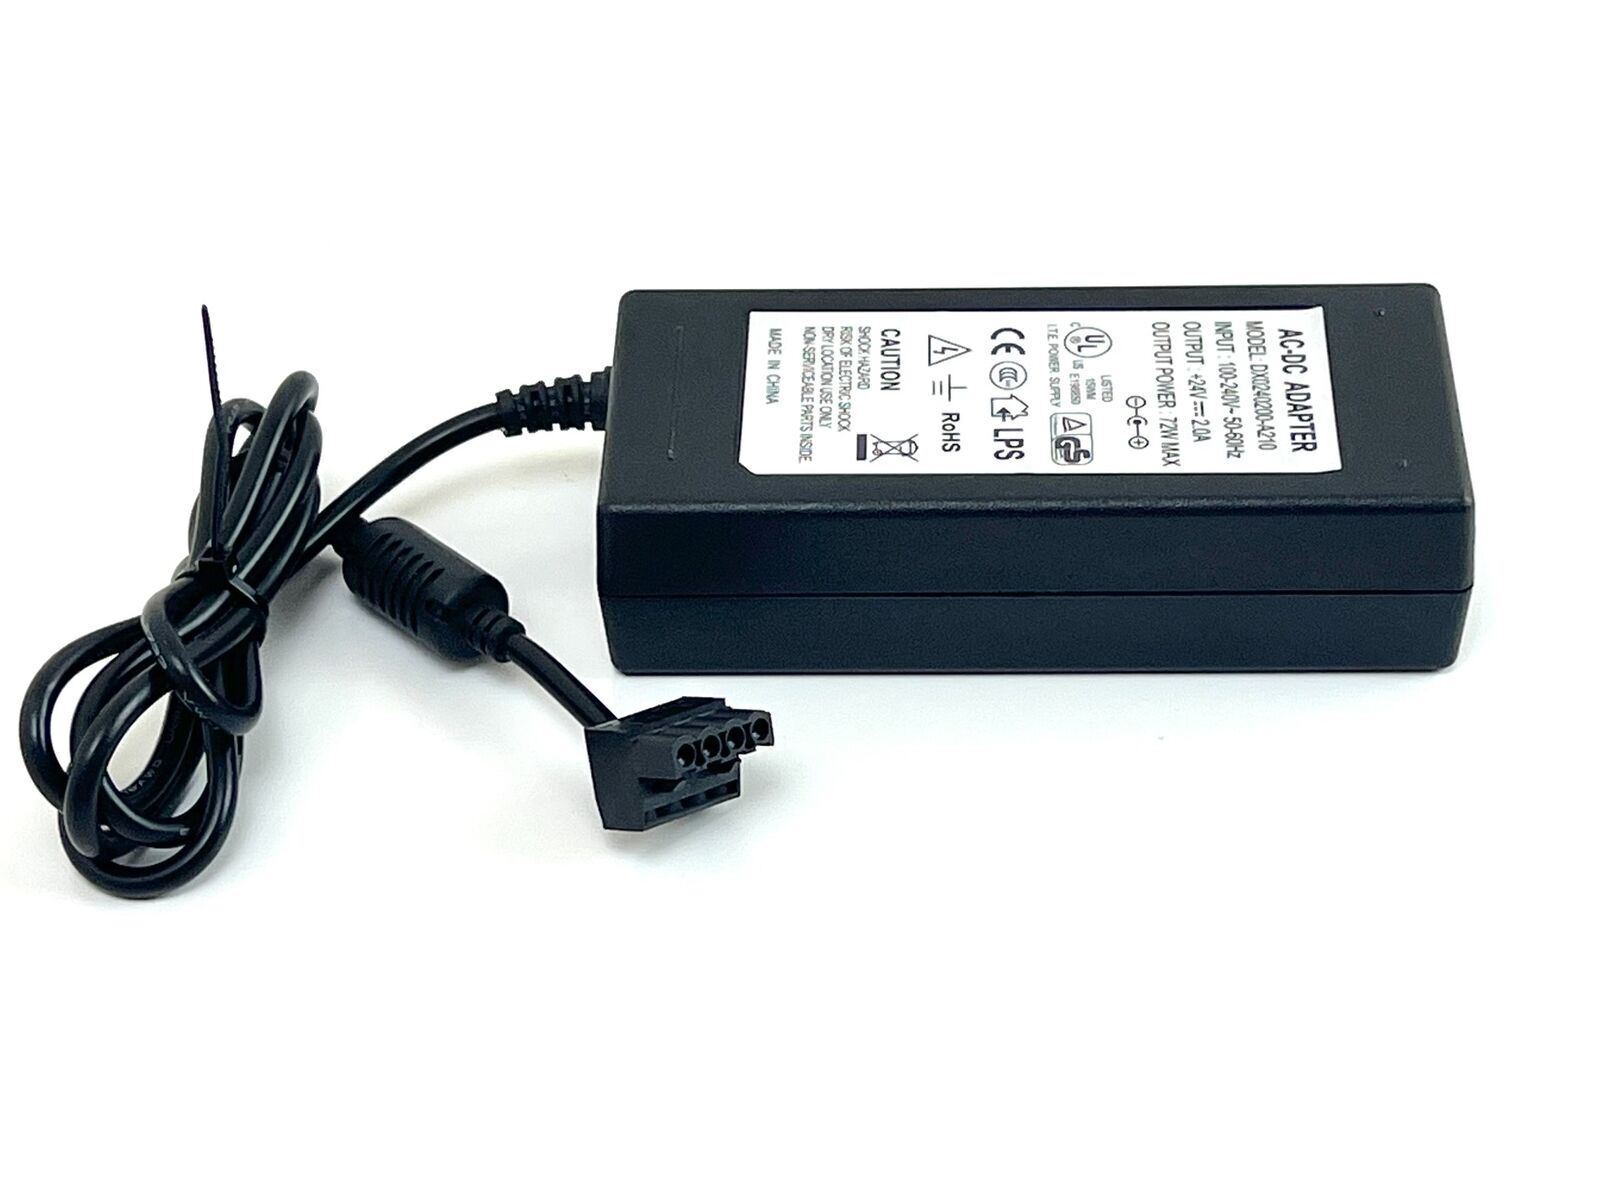 AC-DC Adapter DX0240200-A210 24V 2.0A 72W Genuine Parts Brand Delta Type Power Module Maximum Power Less than 100 W Col - Click Image to Close